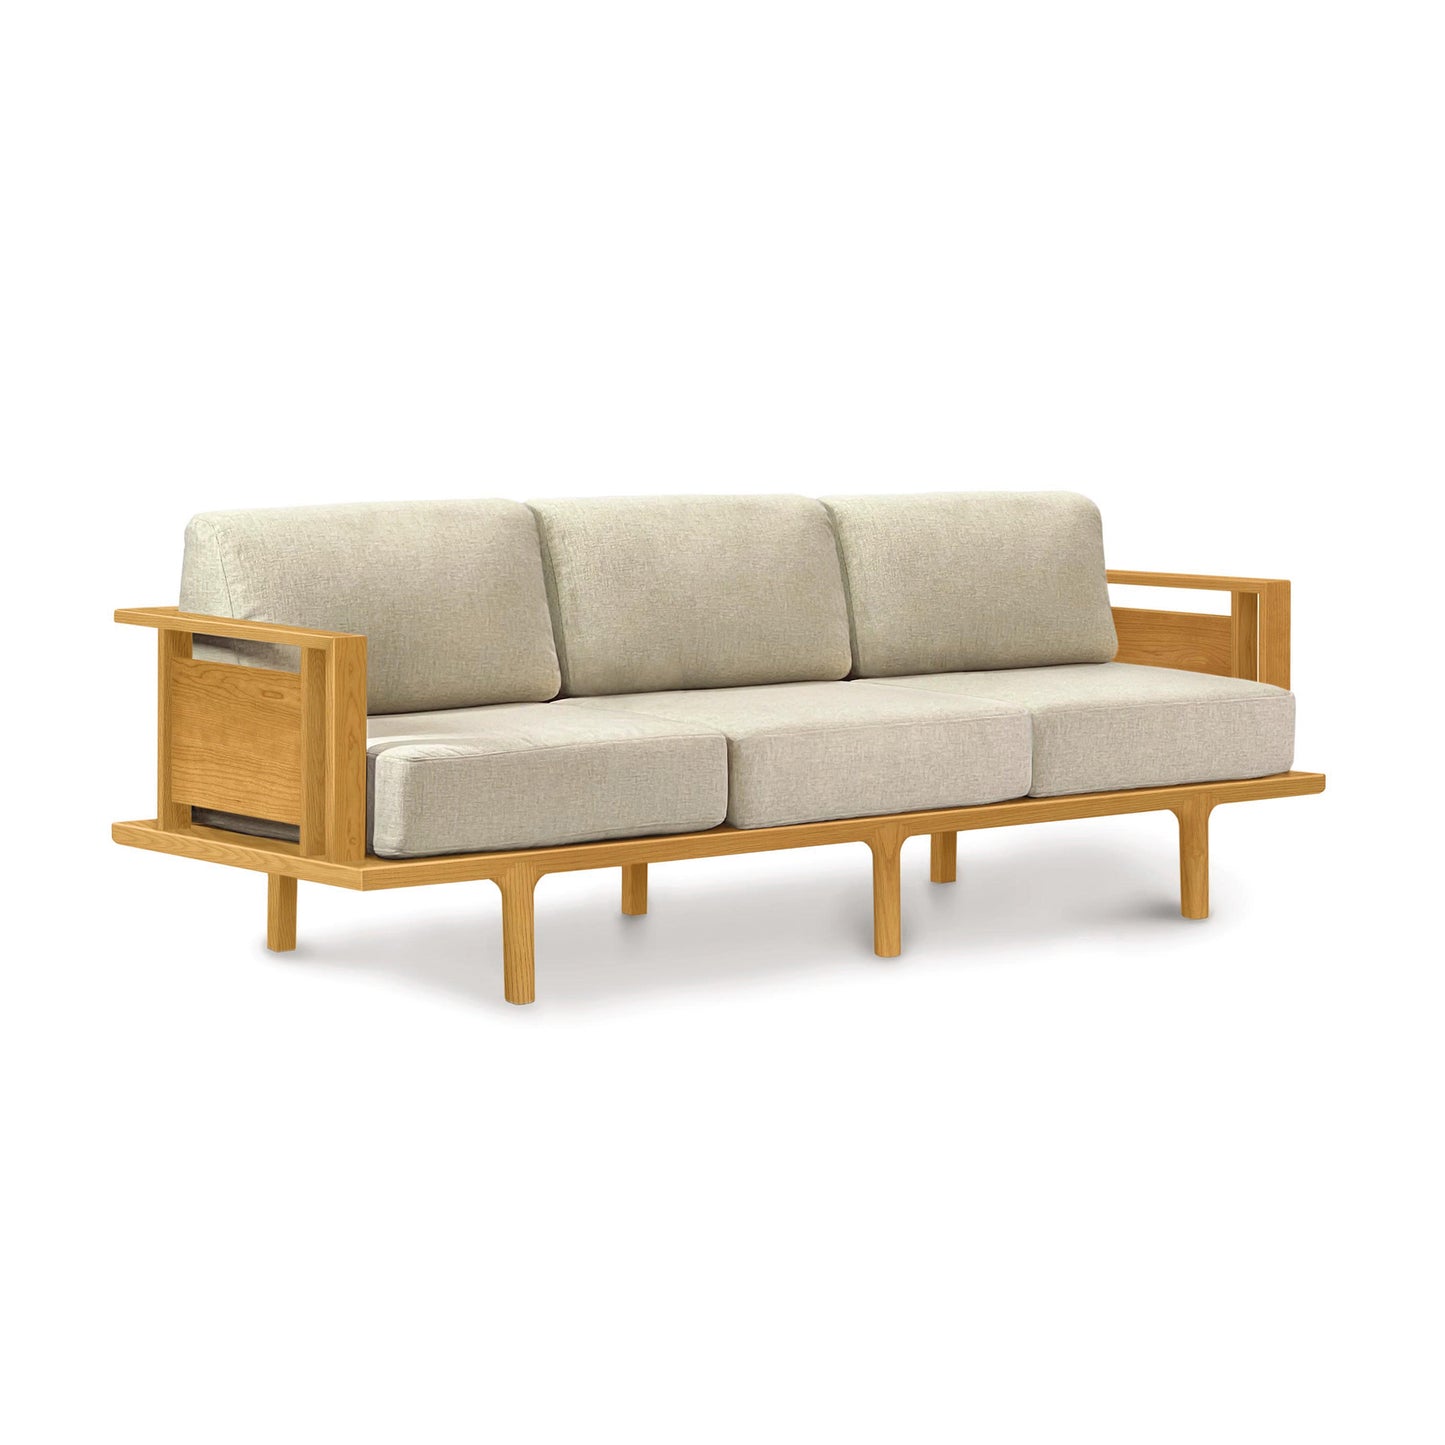 A contemporary Copeland Furniture Sierra Cherry Upholstered Sofa with wooden frame on a white background.